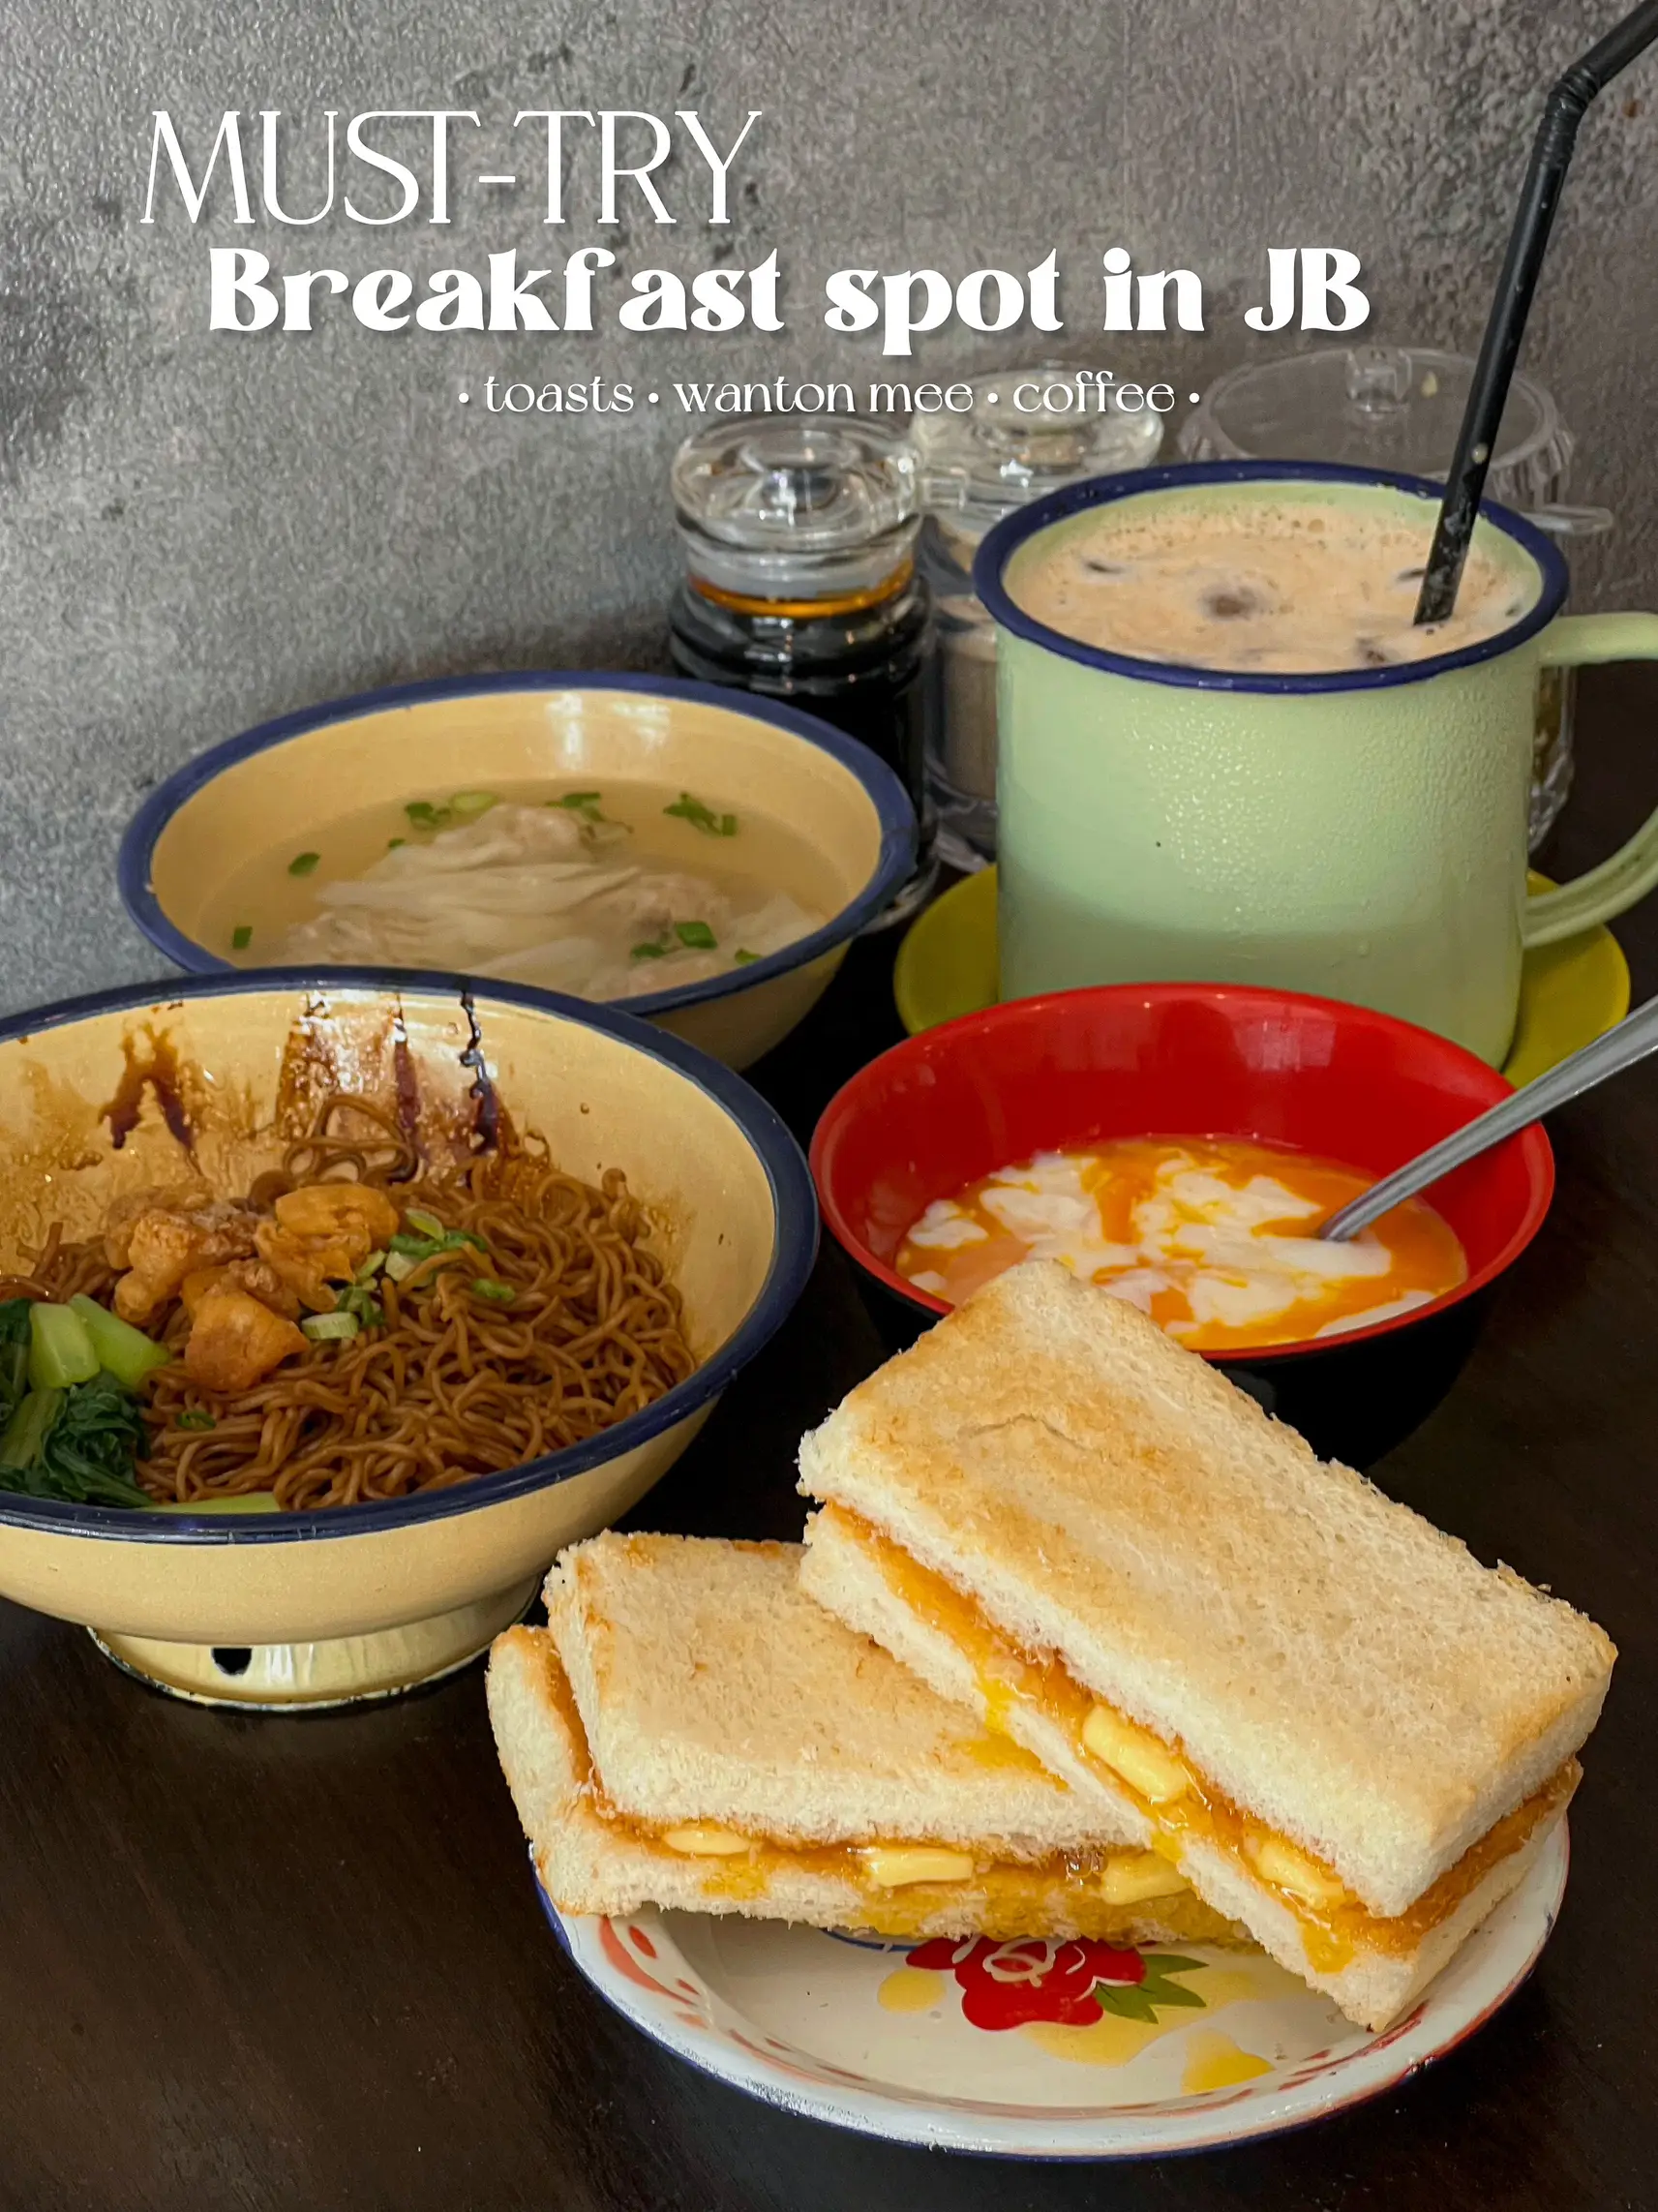 MUST-TRY BREAKFAST SPOT IN JB FOR TOASTS 🍳🍞🍜's images(0)